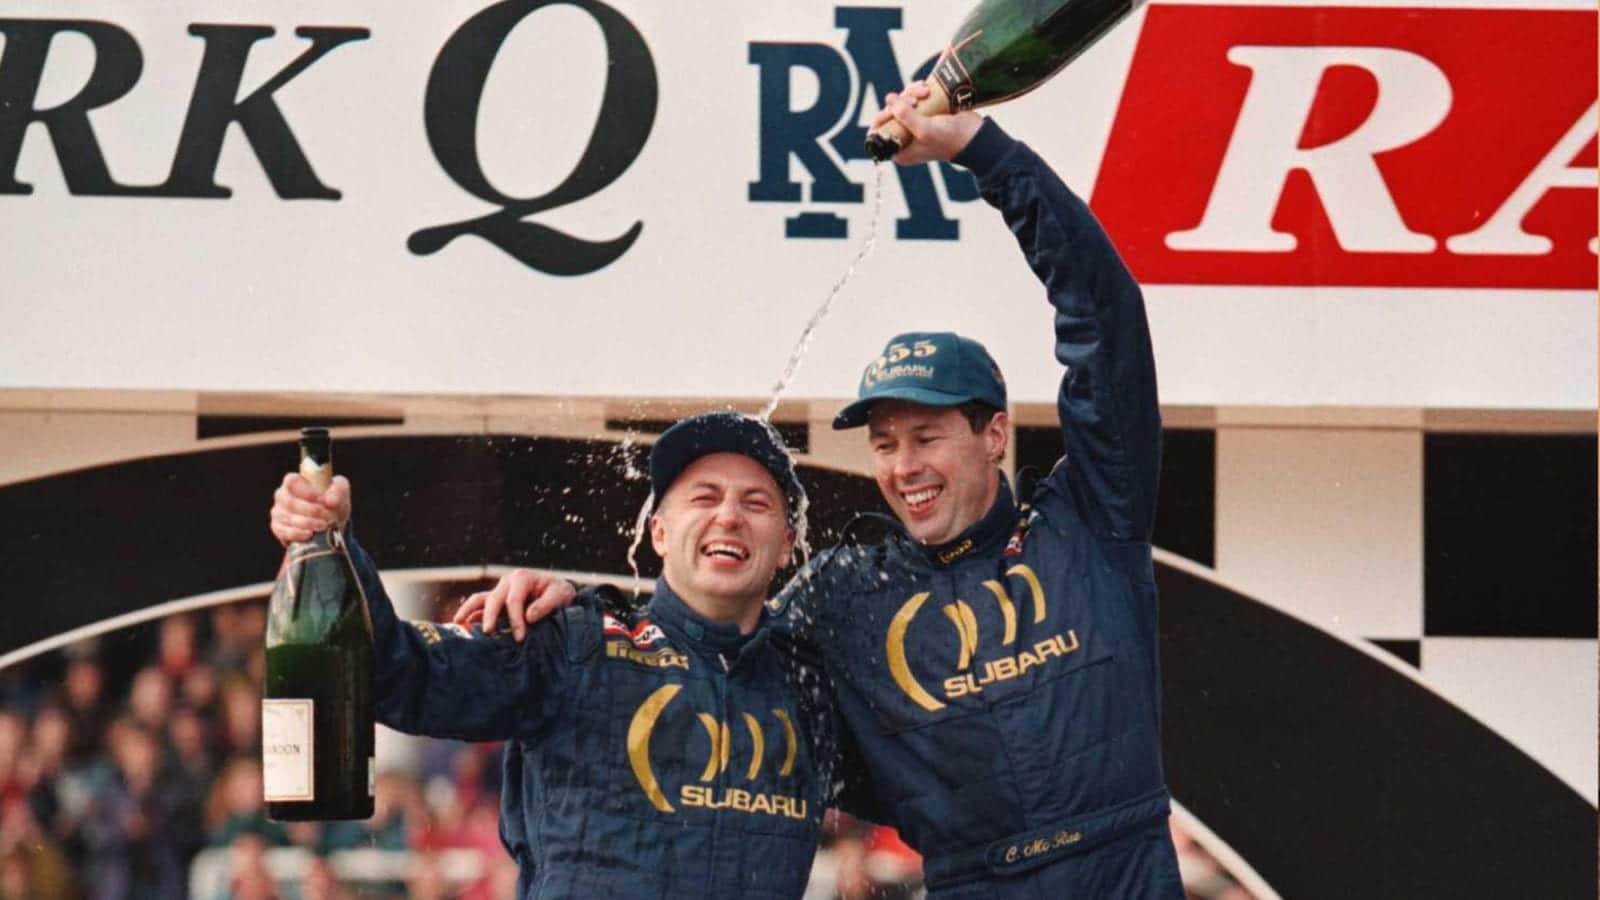 Colin McRae and Derek Ringer celebrate winning the 1995 RAC RAlly and the World Rally Championship